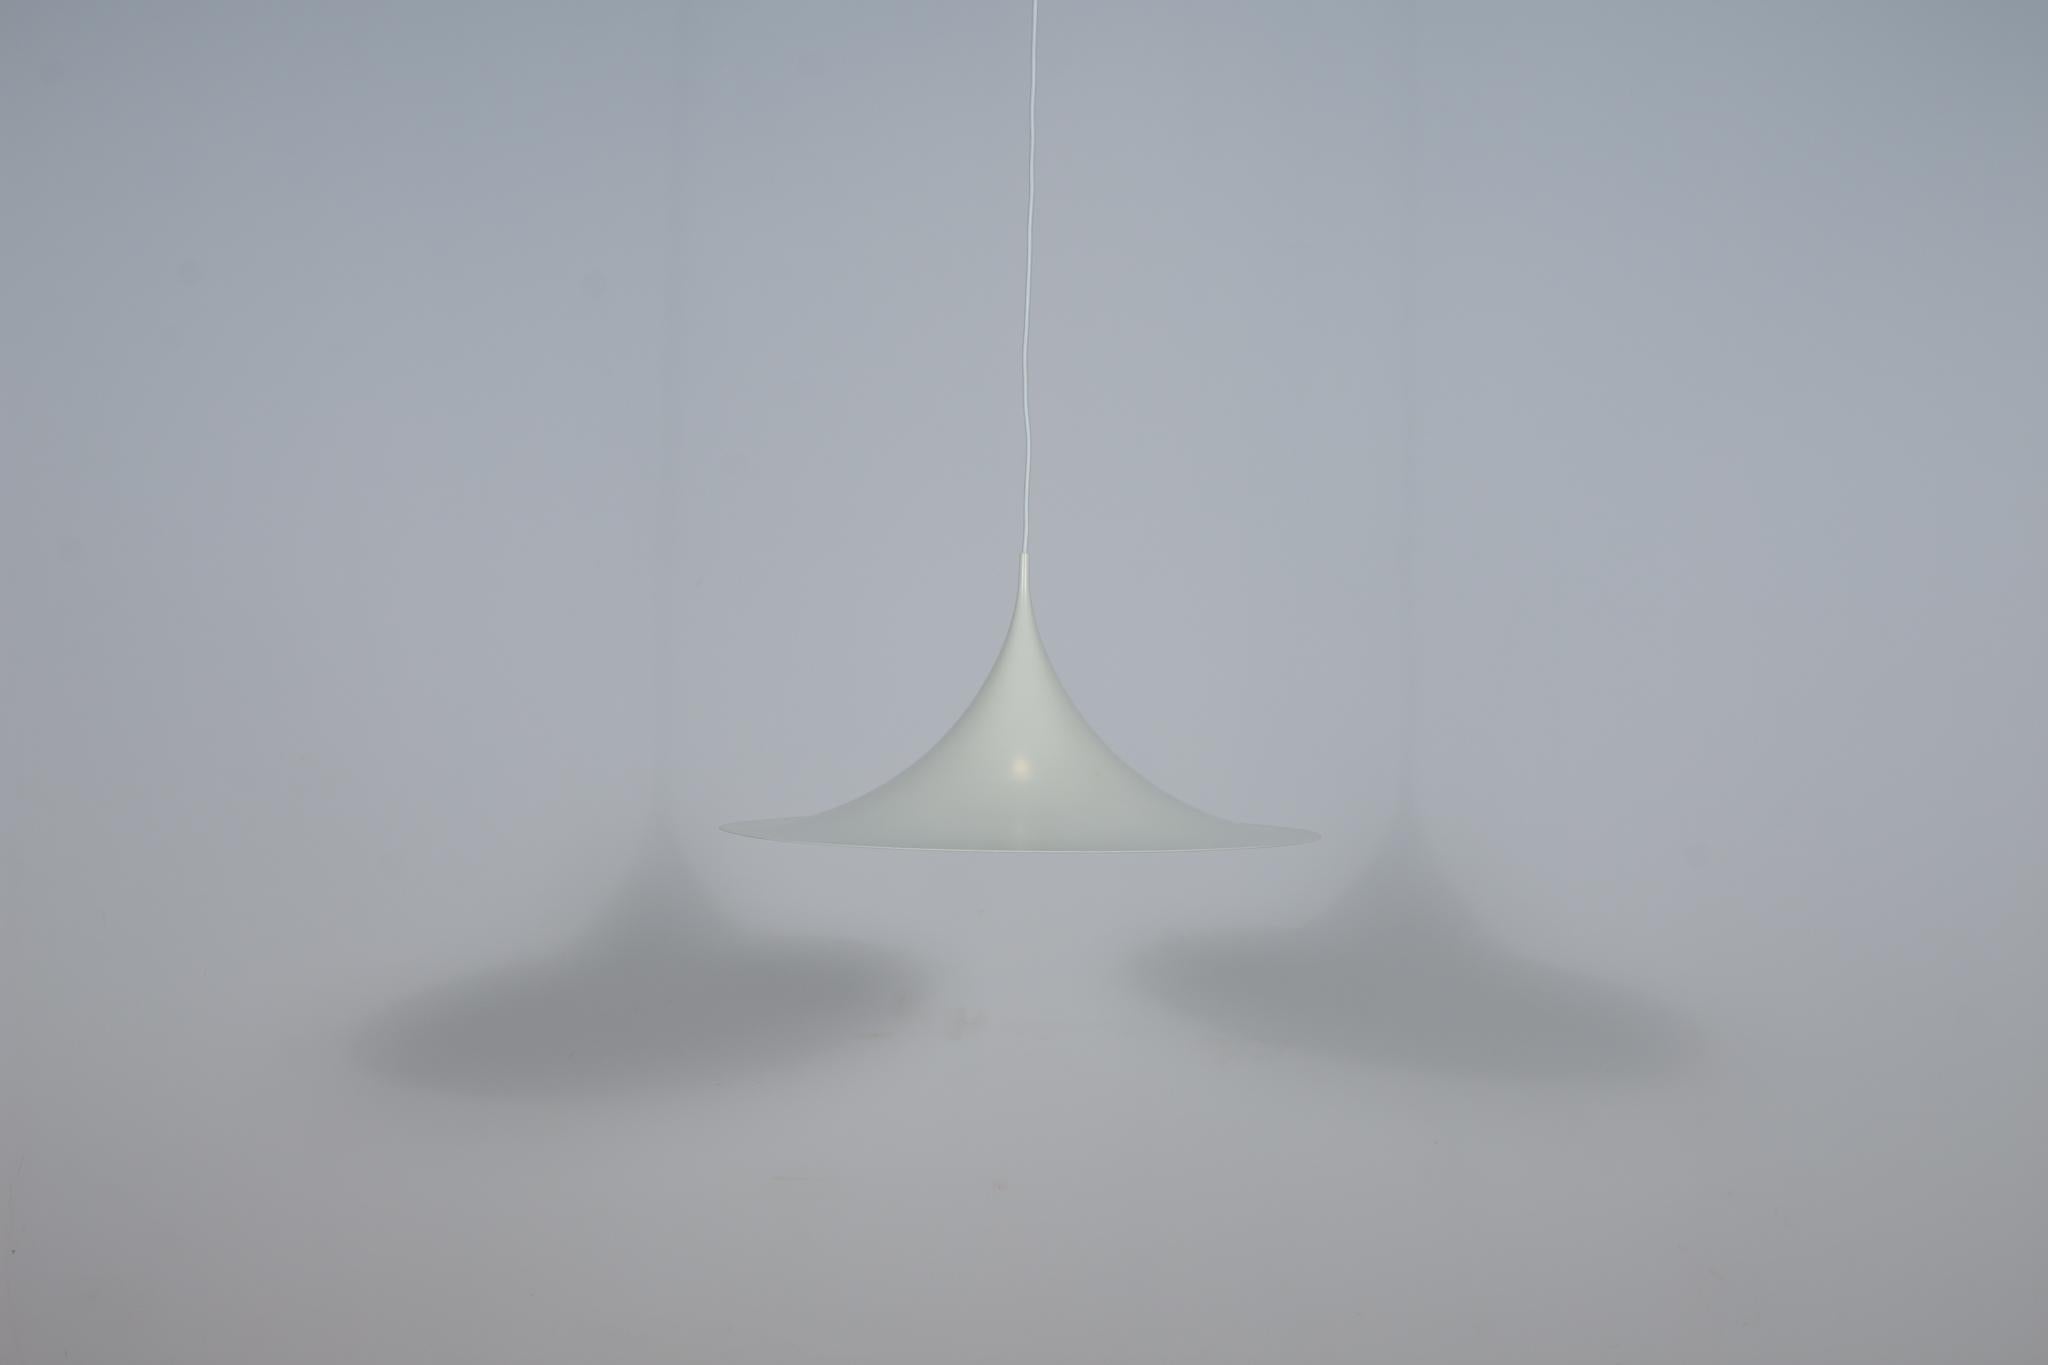 The pendant lamp designed by Claus Bonderup and Torsten Thorup for Fog & Morup in 1967. The Semi hanging lamp has a beautiful refined and organic shape. The lamp is made of painted aluminium. Lamp  was produced in many sizes, with diameters from 10